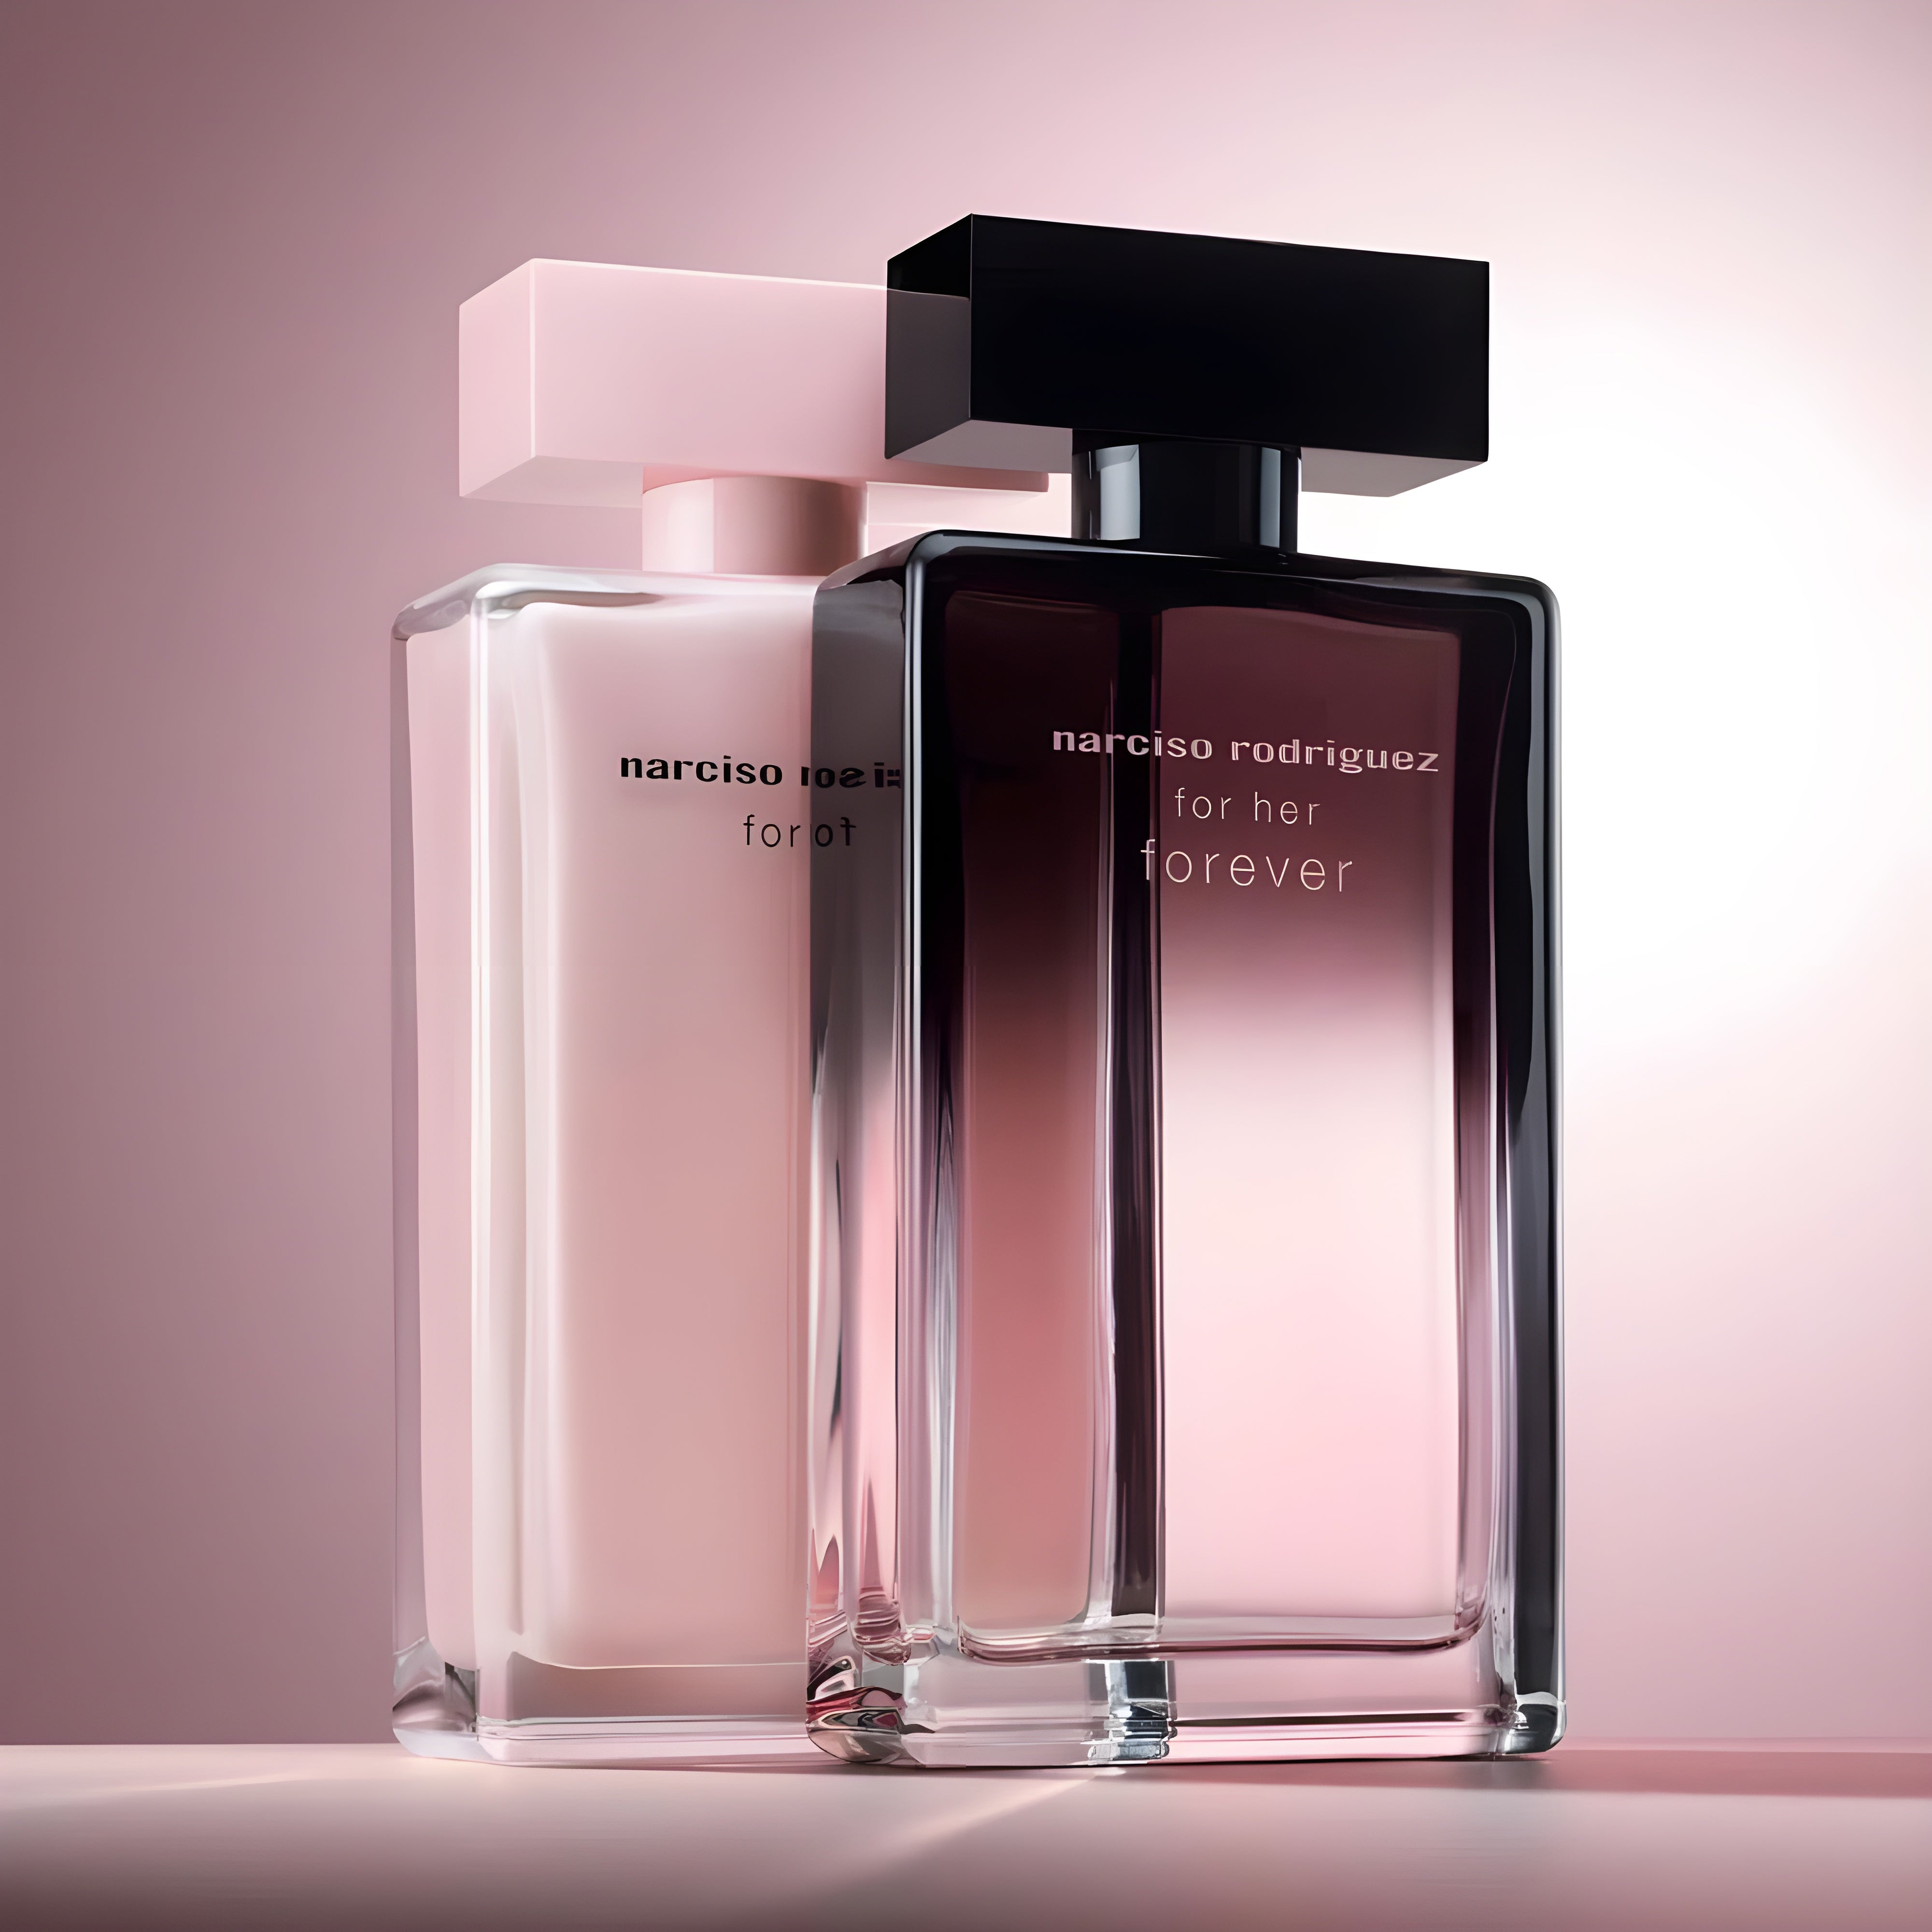 Narciso Rodriguez For Her Signature Scent Body Lotion Set | My Perfume Shop Australia